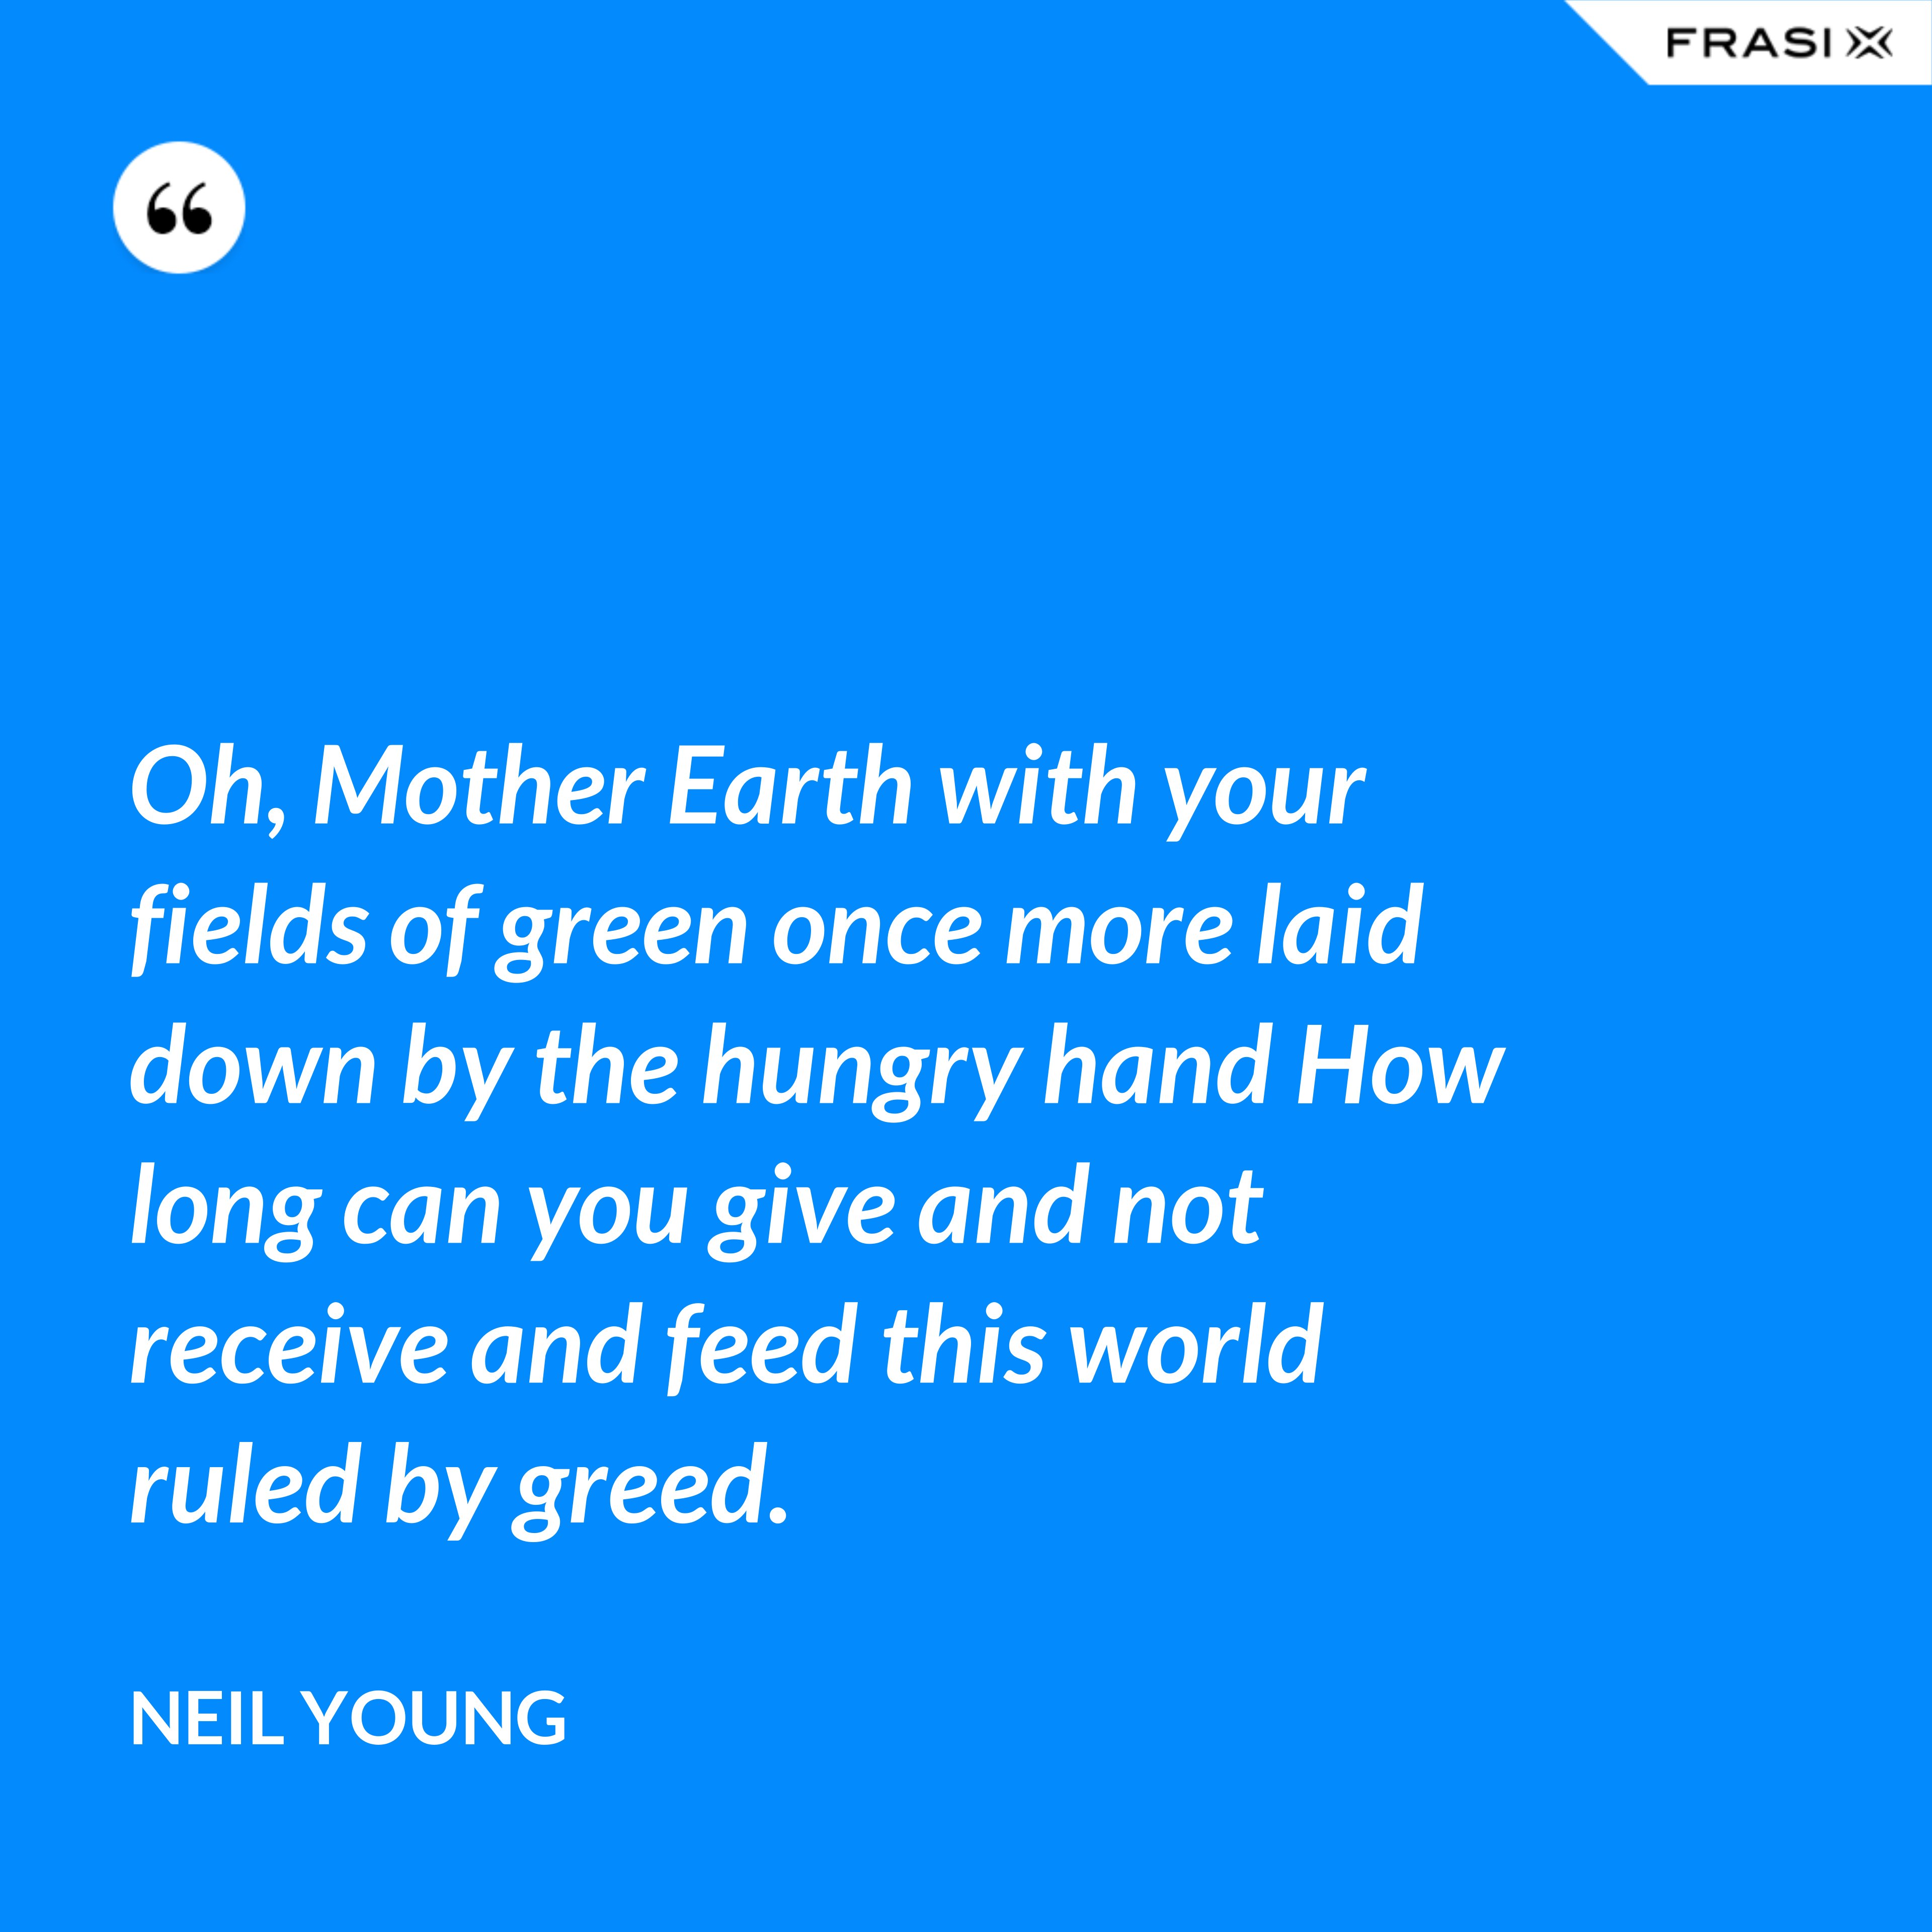 Oh, Mother Earth with your fields of green once more laid down by the hungry hand How long can you give and not receive and feed this world ruled by greed. - Neil Young